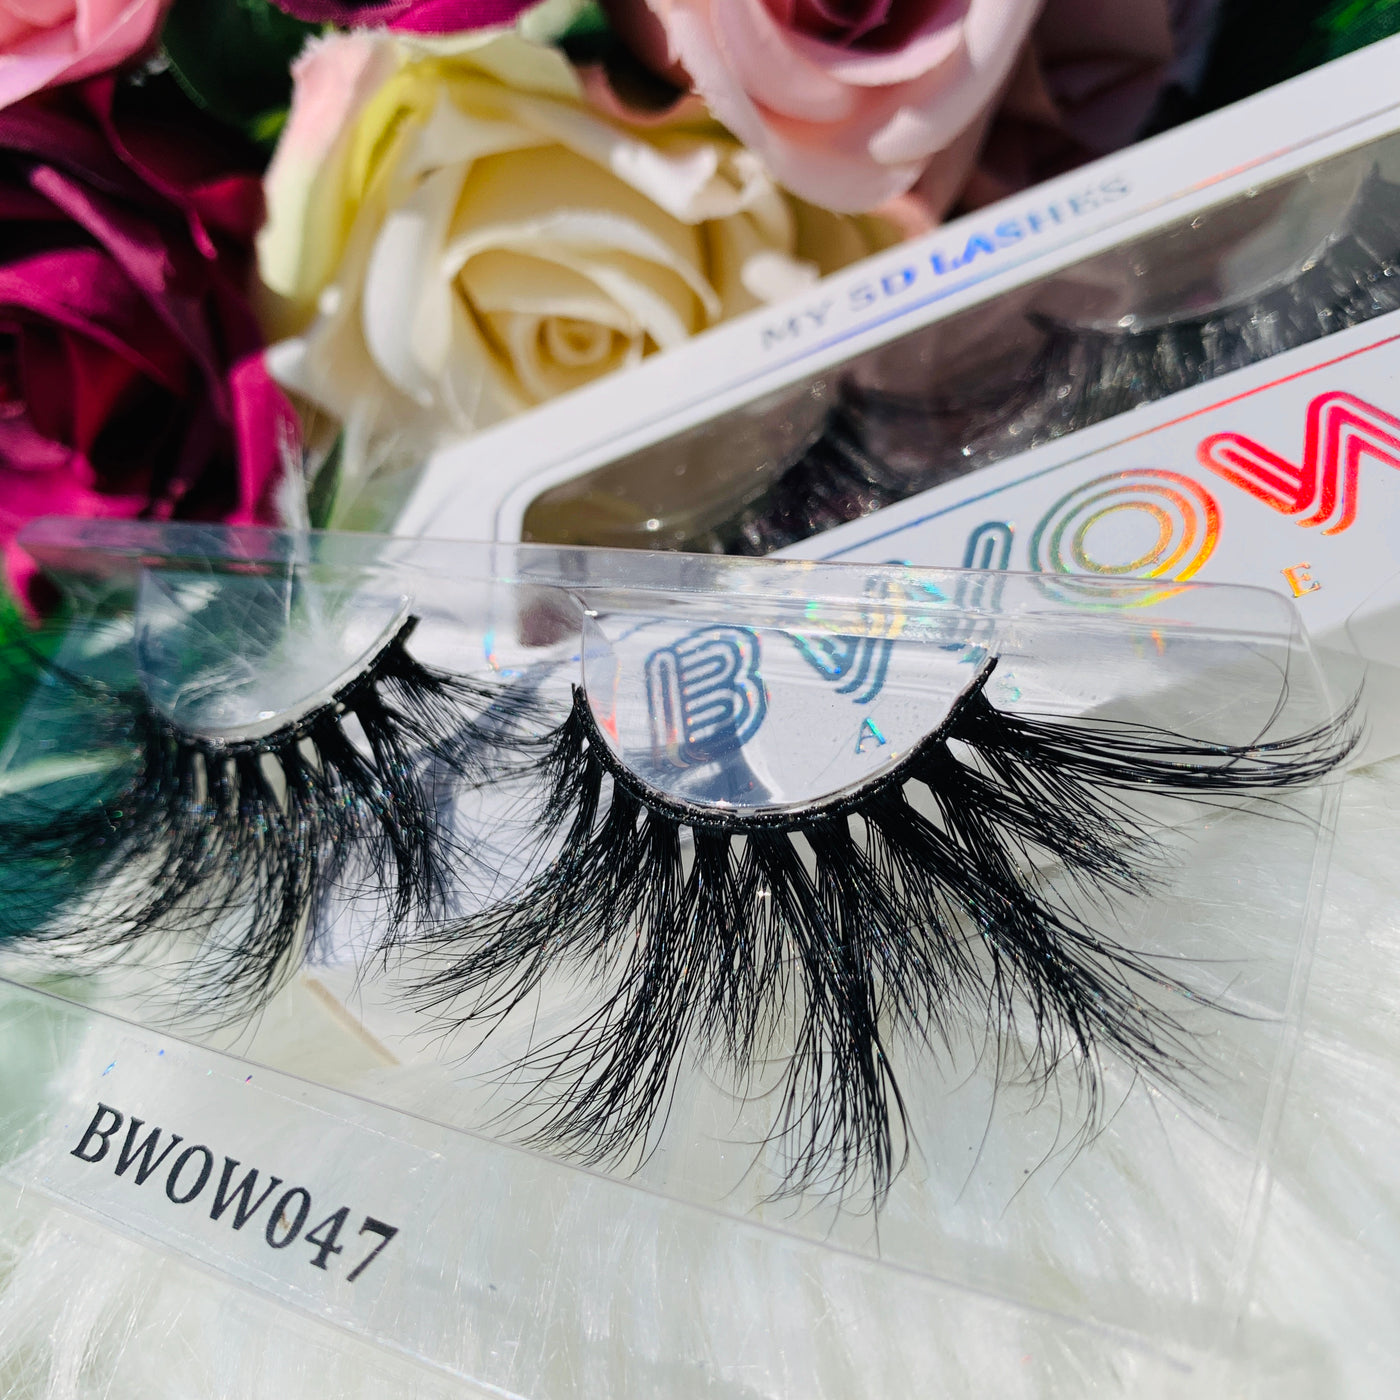 MY 5D LUXURY LASHES BWOW047 - BWOW Cosmetics